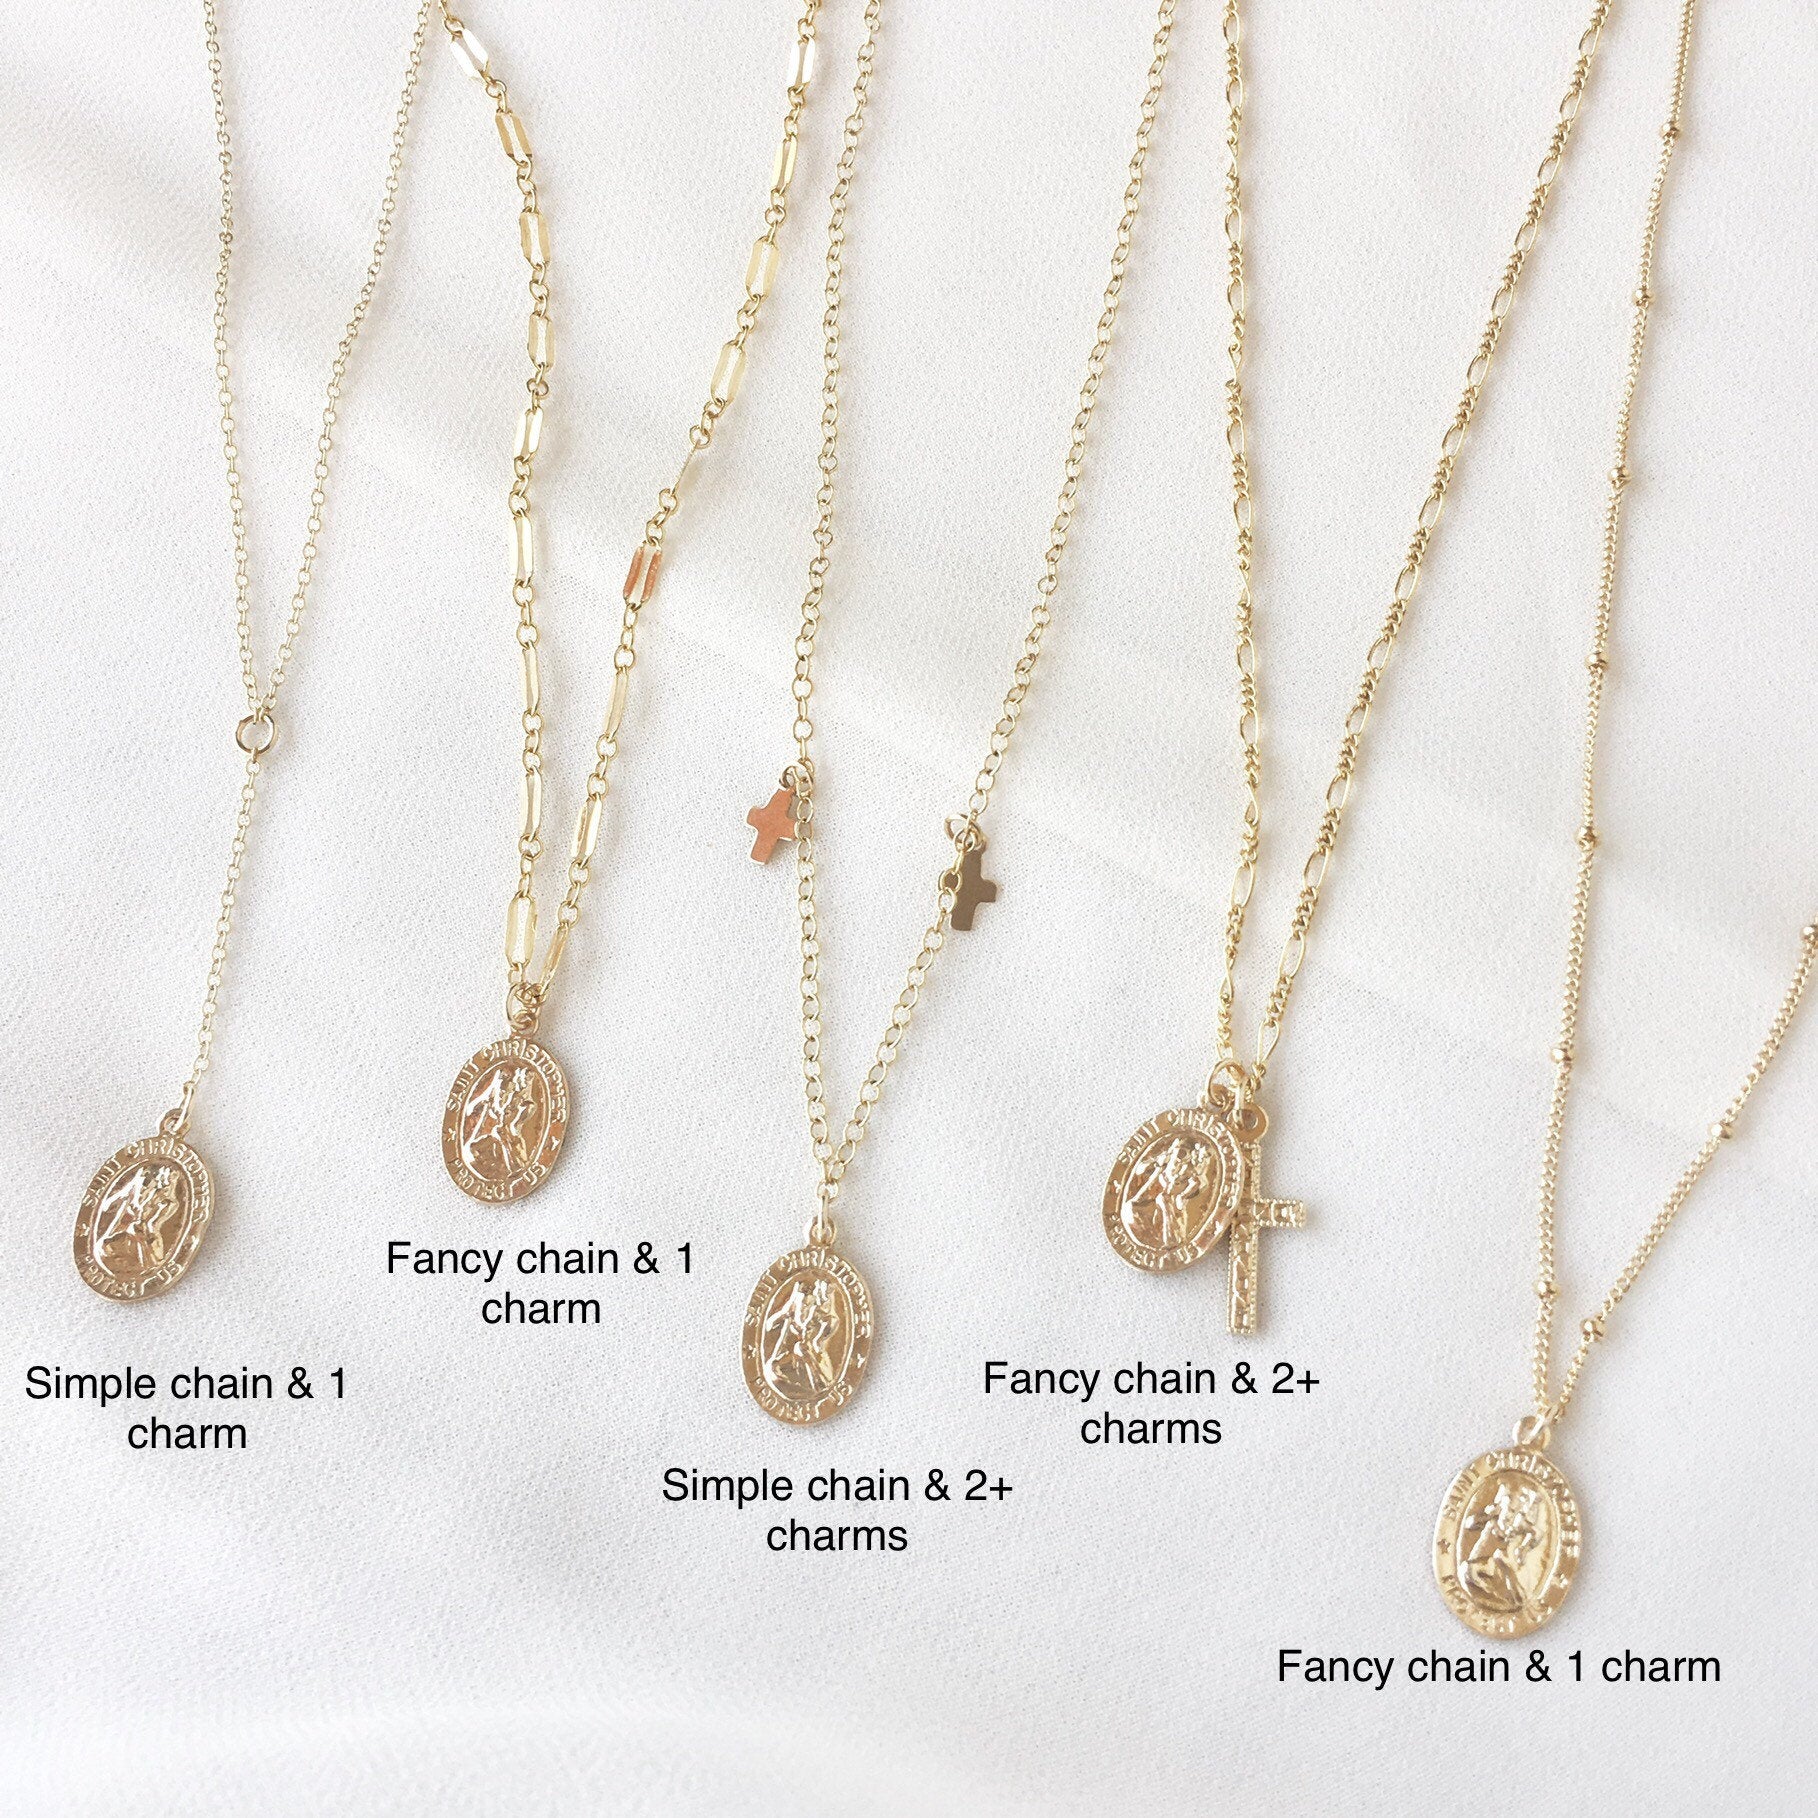 Build Your Own St Christopher Necklace